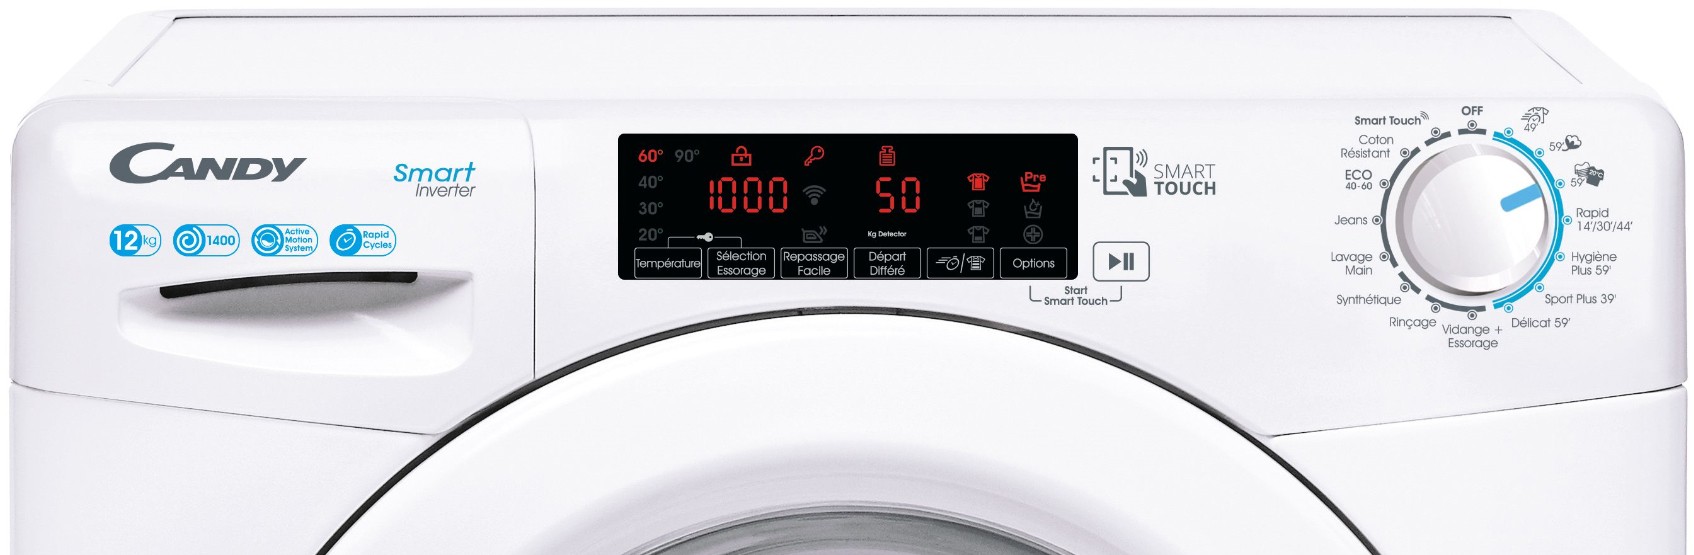 CANDY Lave linge Frontal NFC + WiFi 1400 trs/mn 12kg - CS1412TME1-47